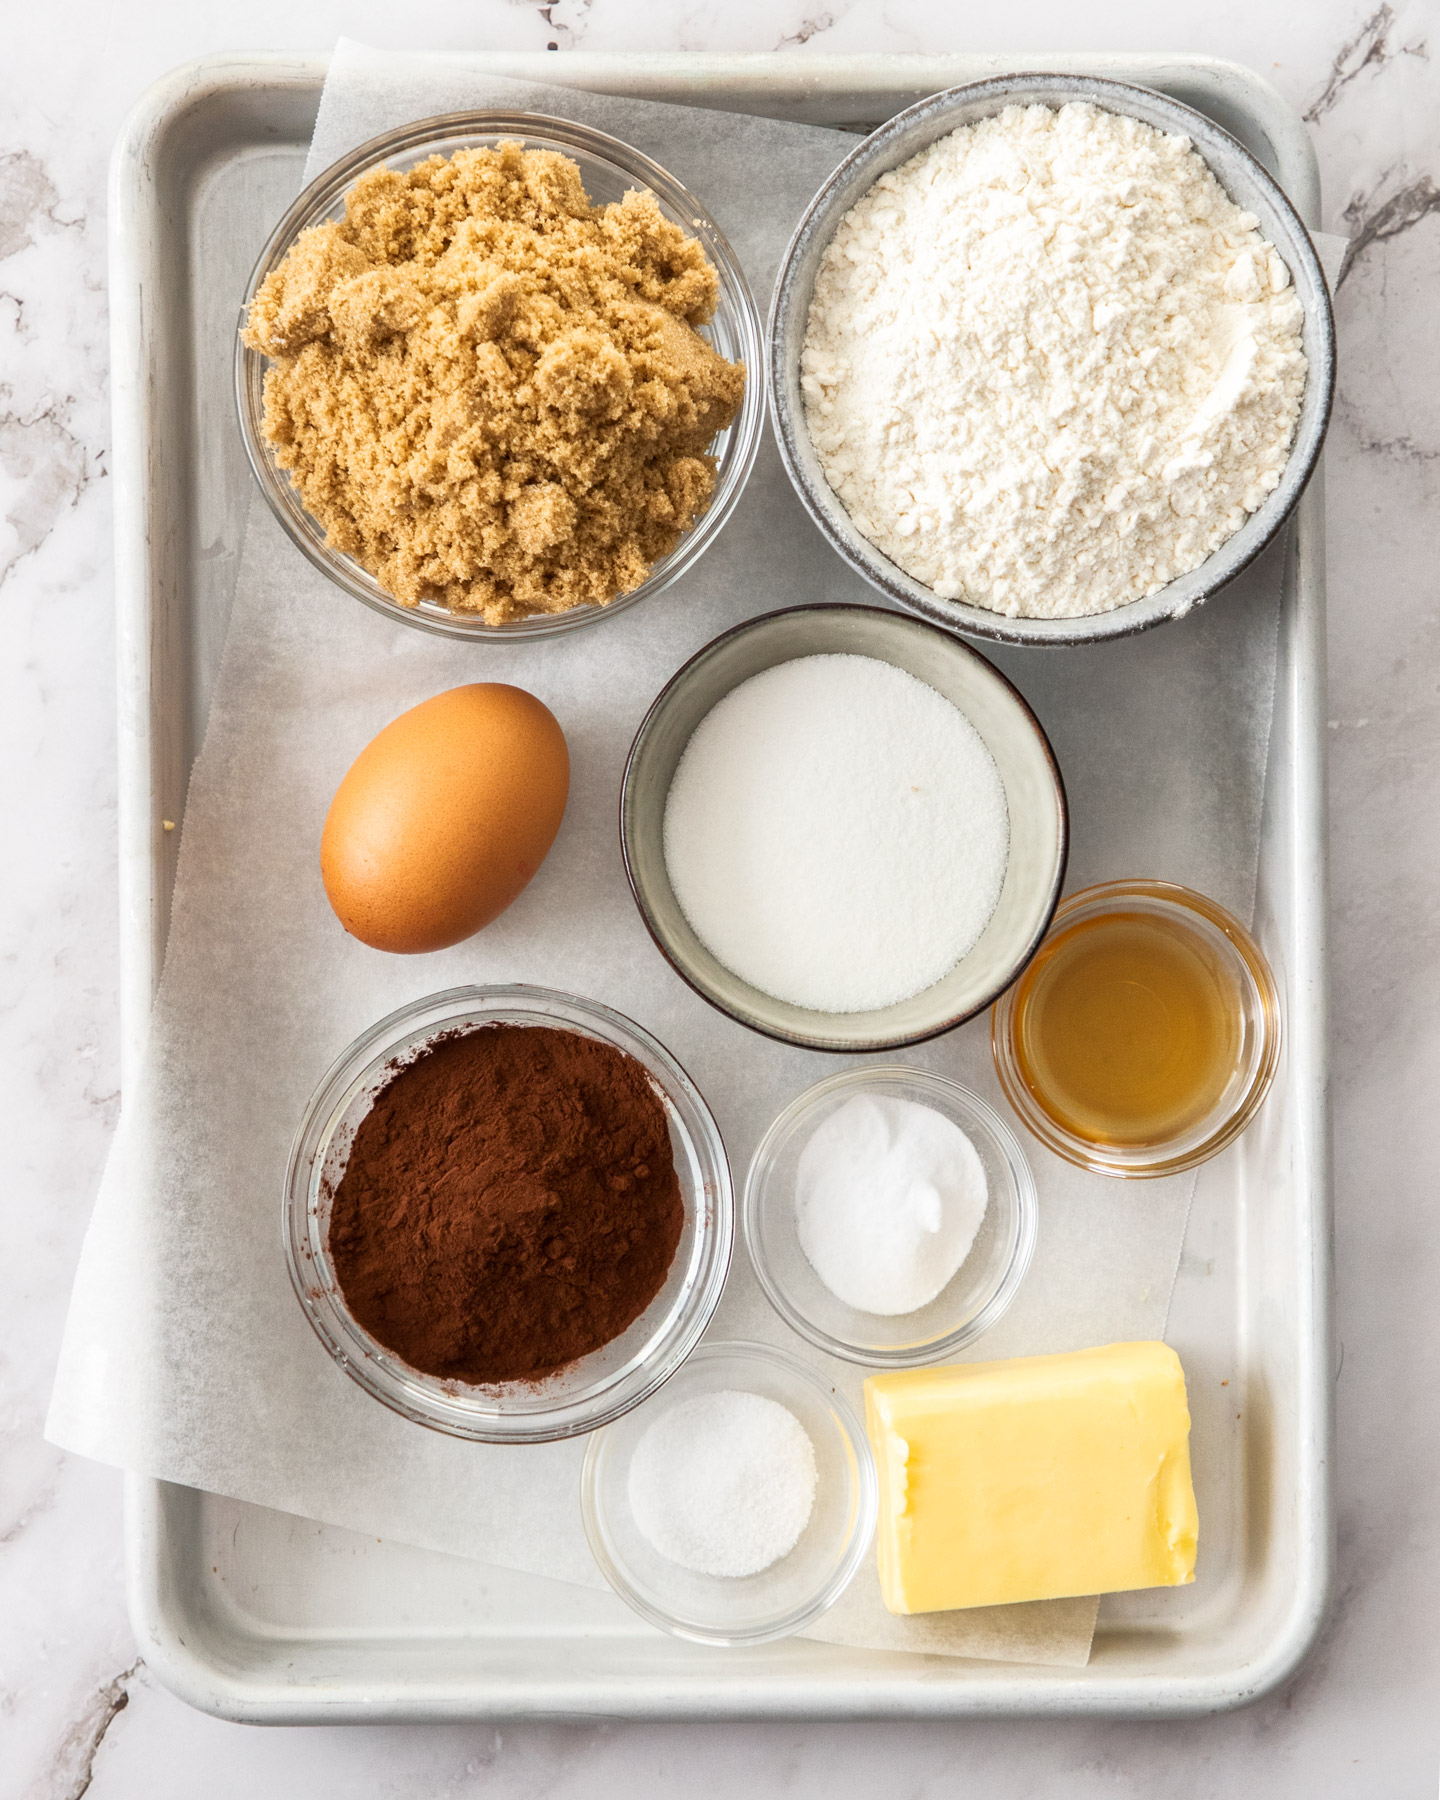 Ingredients for marble cookies on a baking tray.